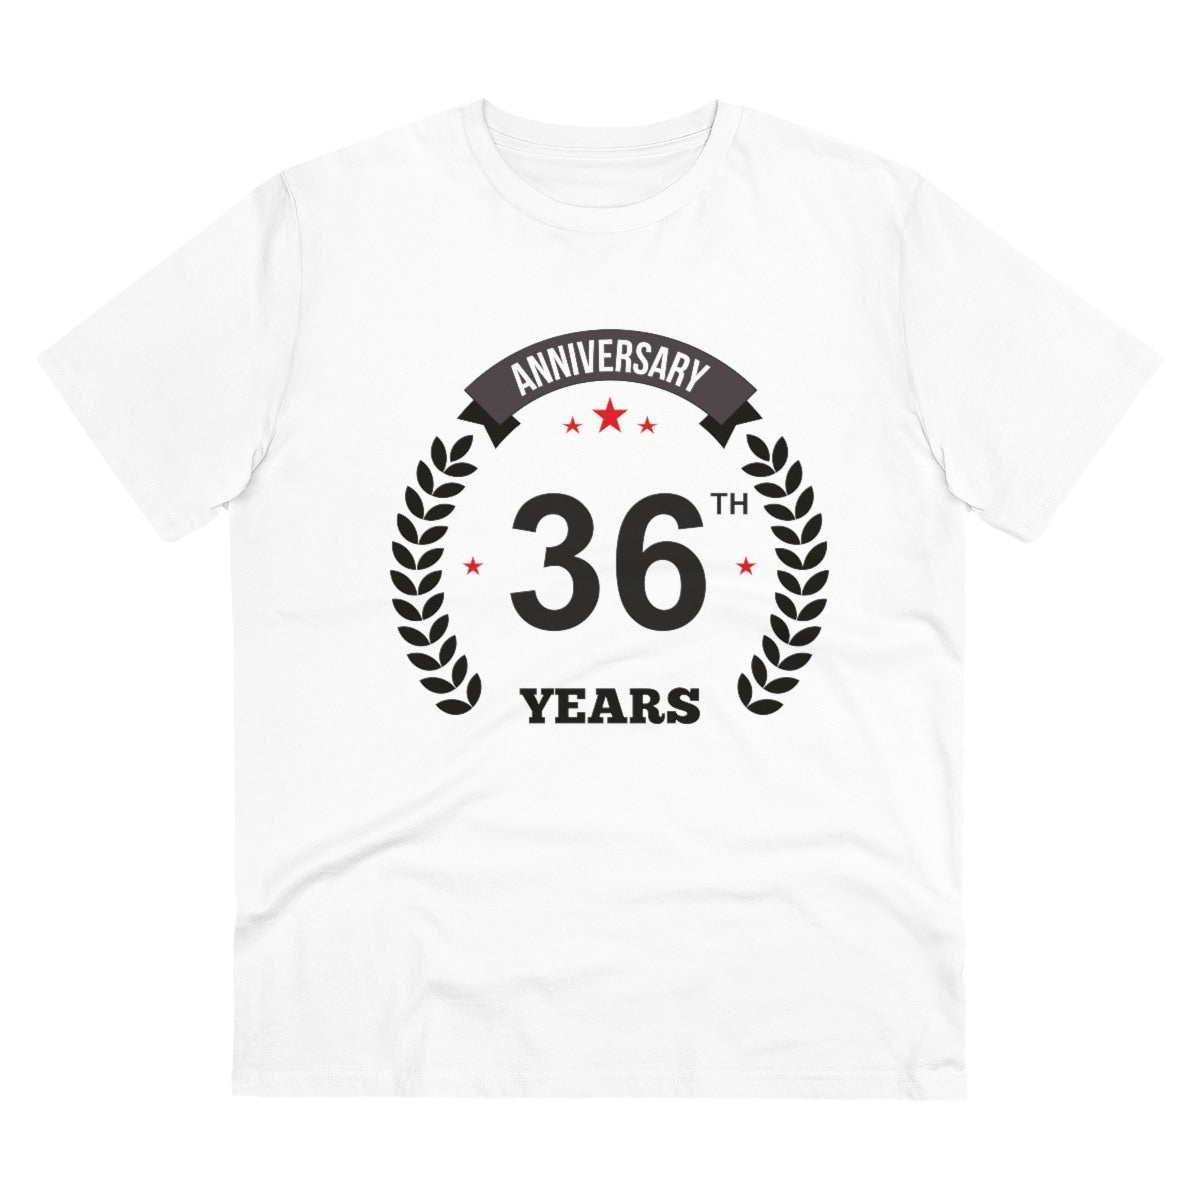 Men's PC Cotton 36th Anniversary Printed T Shirt (Color: White, Thread Count: 180GSM) - GillKart